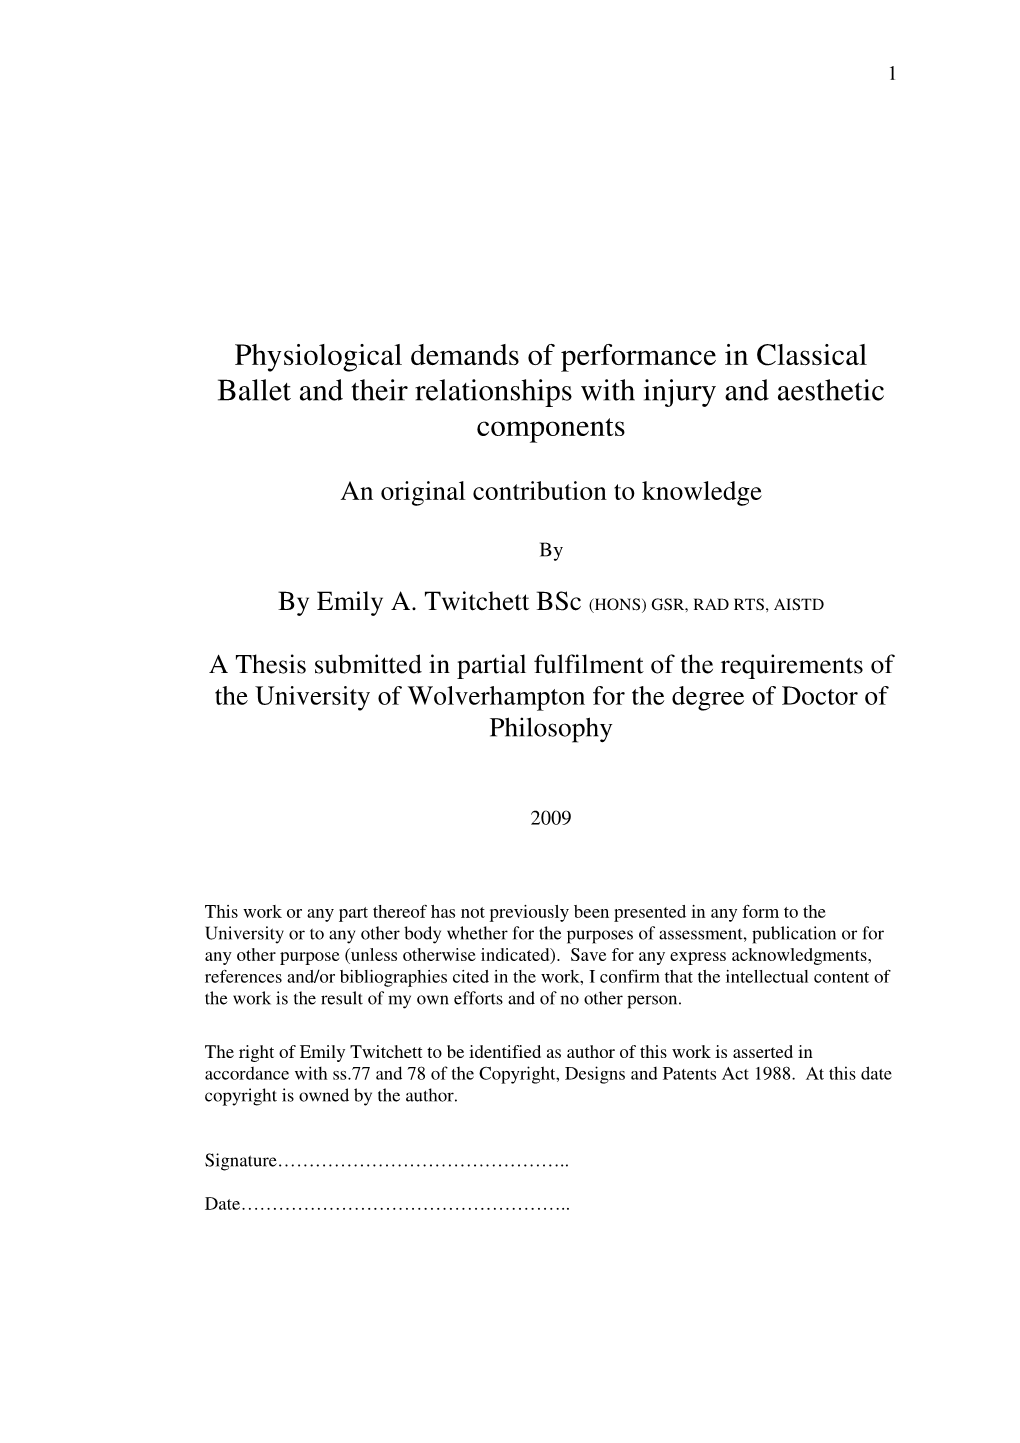 Physiological Demands of Performance in Classical Ballet and Their Relationships with Injury and Aesthetic Components